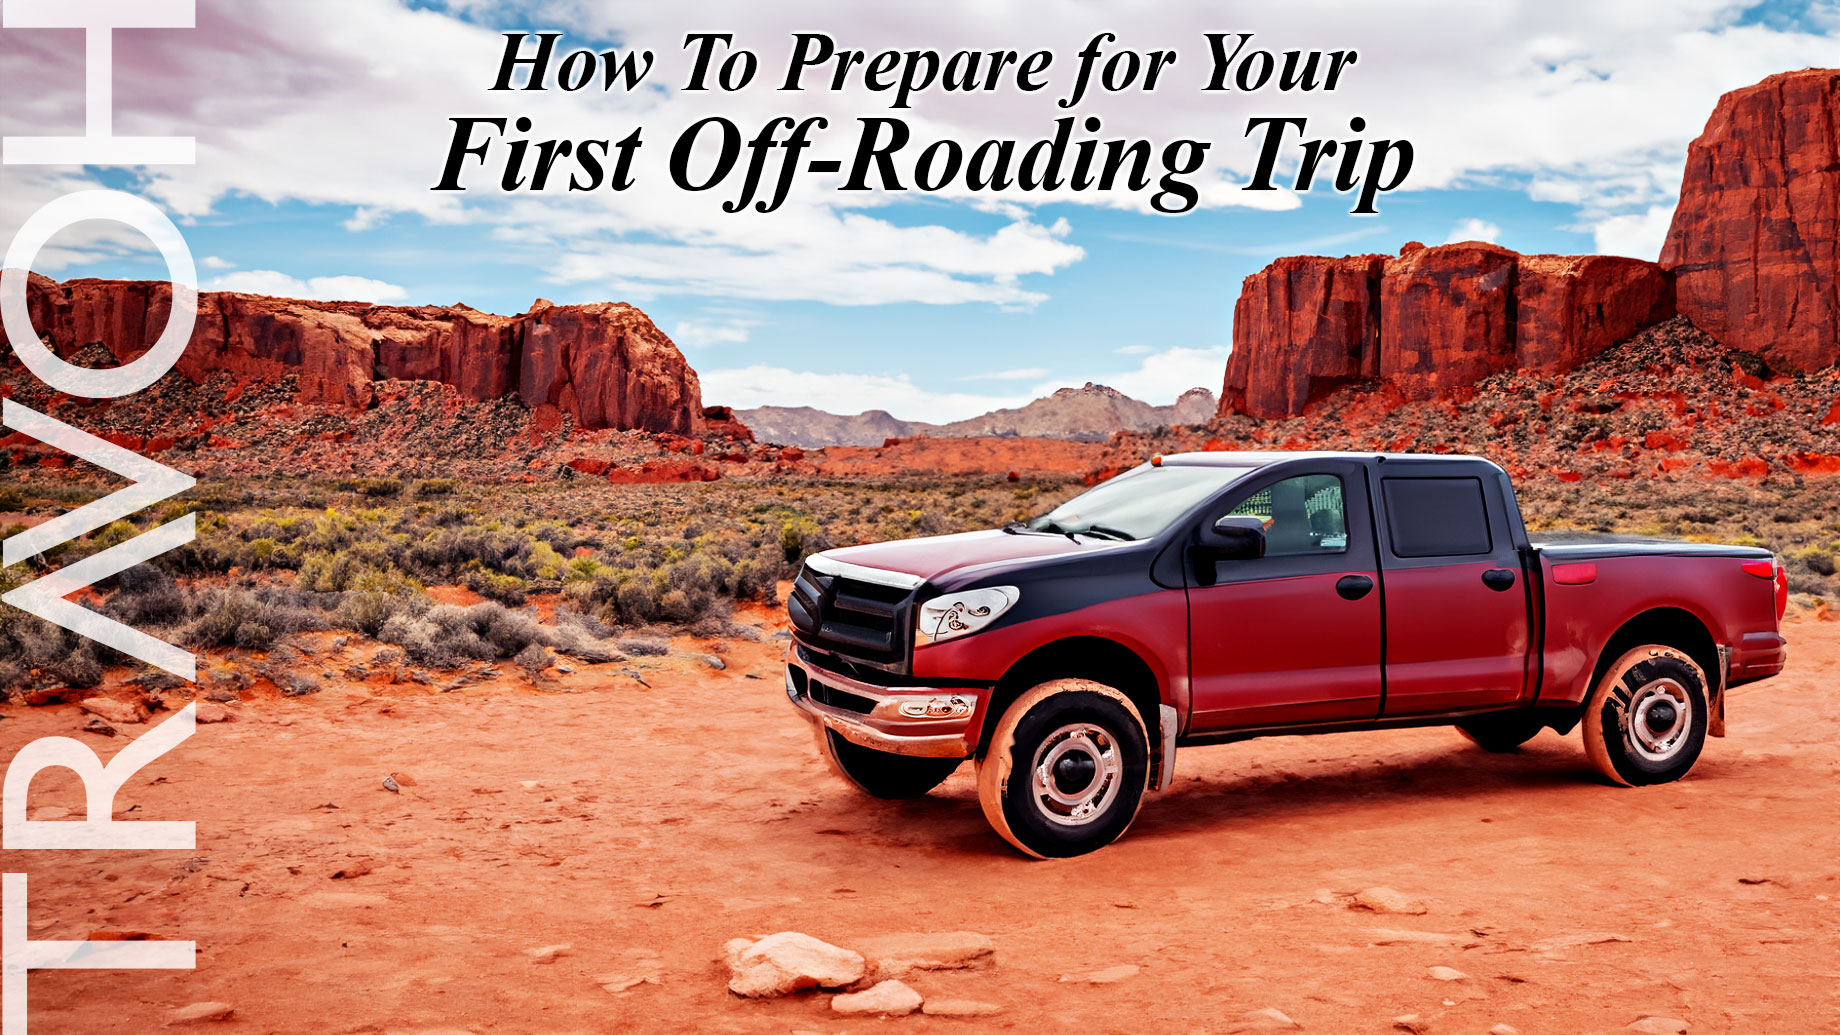 How To Prepare for Your First Off-Roading Trip